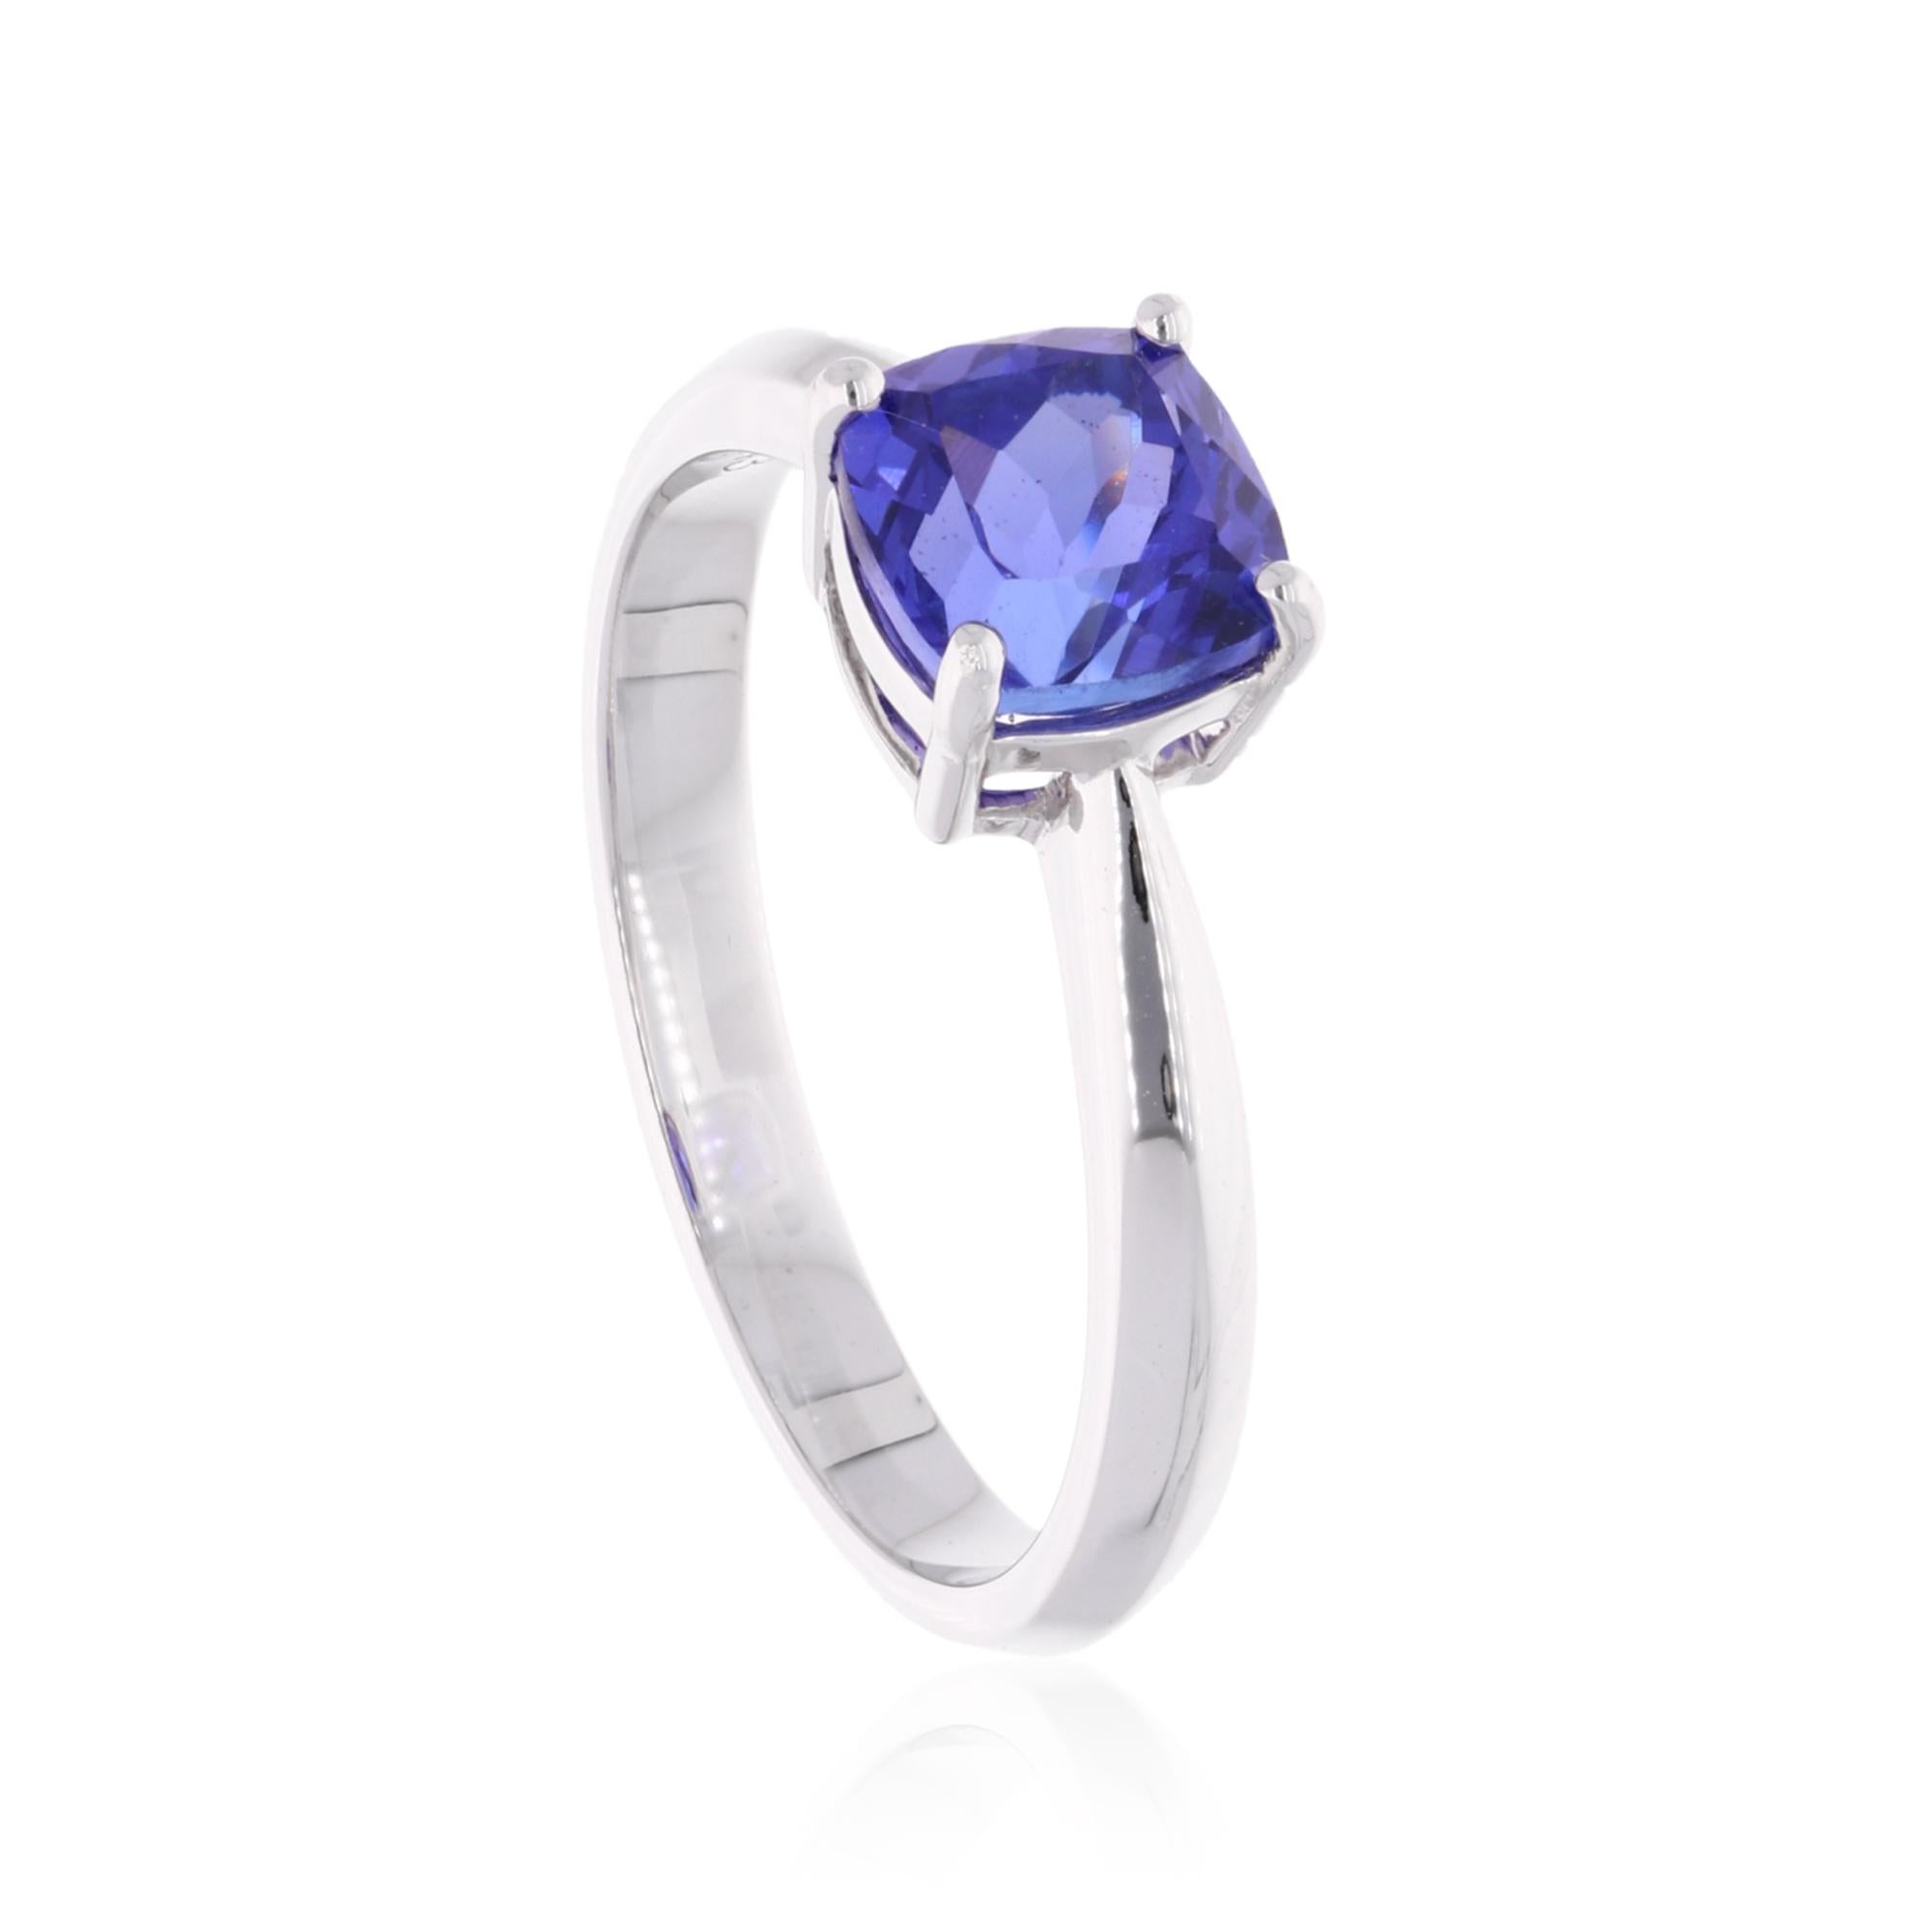 Item Code :- SER-22339 (14k)
Gross Weight :- 2.89 grams
14k Solid White Gold Weight :- 2.56 gram
Natural Tanzanite Weight :- 1.67 Carat 
Ring Size :- 7 US & All size available

✦ Sizing
.....................
We can adjust most items to fit your